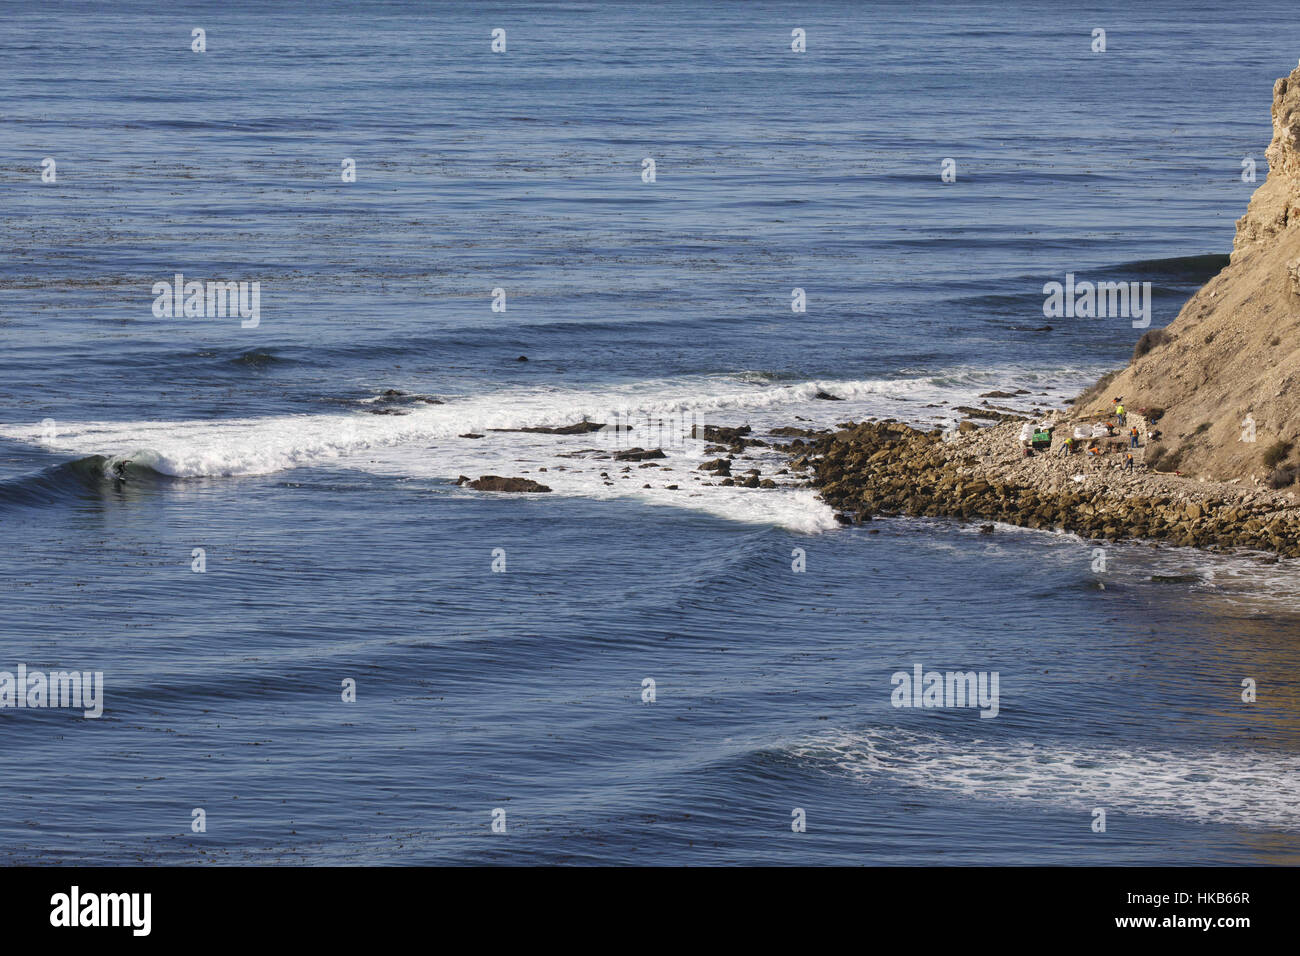 November 29, 2016 - Palos Verdes Estates, CA, U.S. - A man surfs as city contractors demolish a patio built by local surfers on the shoreline of the Pacific Ocean at Lunada Bay on Tuesday, November 29, 2016 in Palos Verdes Estates, Calif. The patio fort was a popular hangout of the Lunada Bay Boys and the process of tearing it down has become a flashpoint in the debate over surfing localism. Â© 2016 Patrick T. Fallon (Credit Image: © Patrick Fallon via ZUMA Wire) Stock Photo